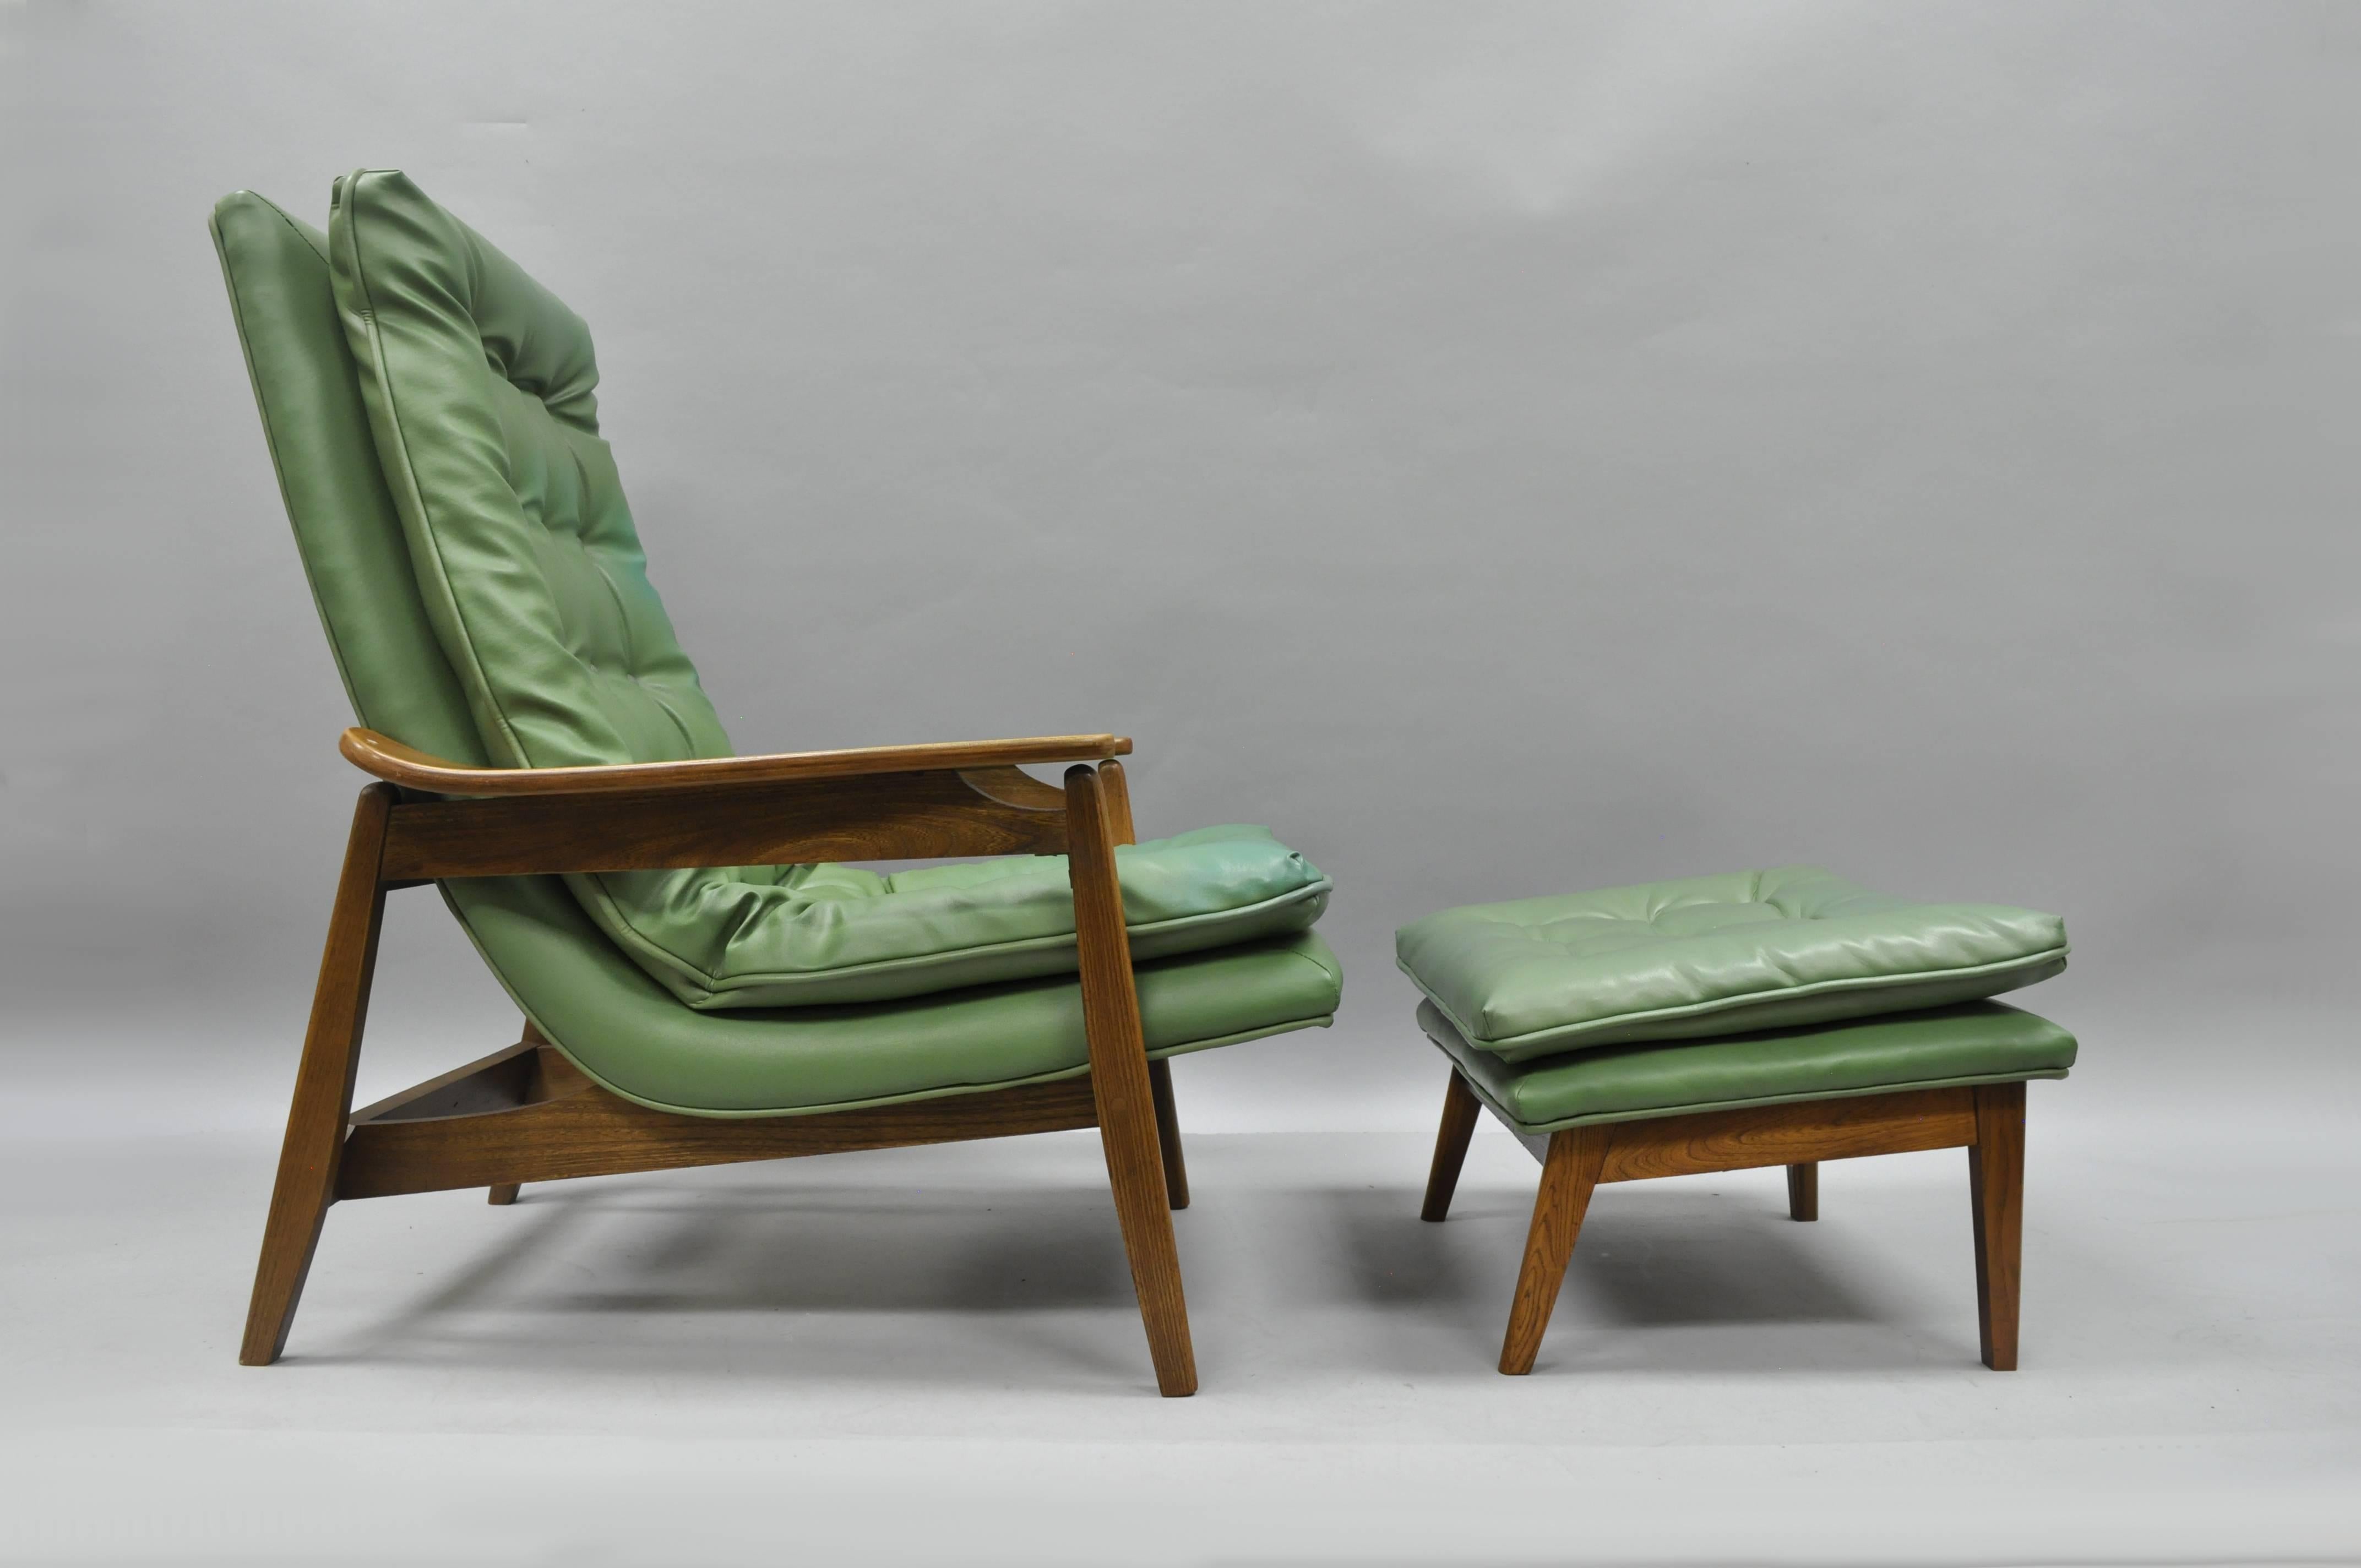 Vintage Mid-Century Modern walnut lounge chair and ottoman after Milo Baughman with original tufted green vinyl upholstery in the Danish modern style. Item features solid wood construction, sleek sculptural form, tall back lounge chair and original